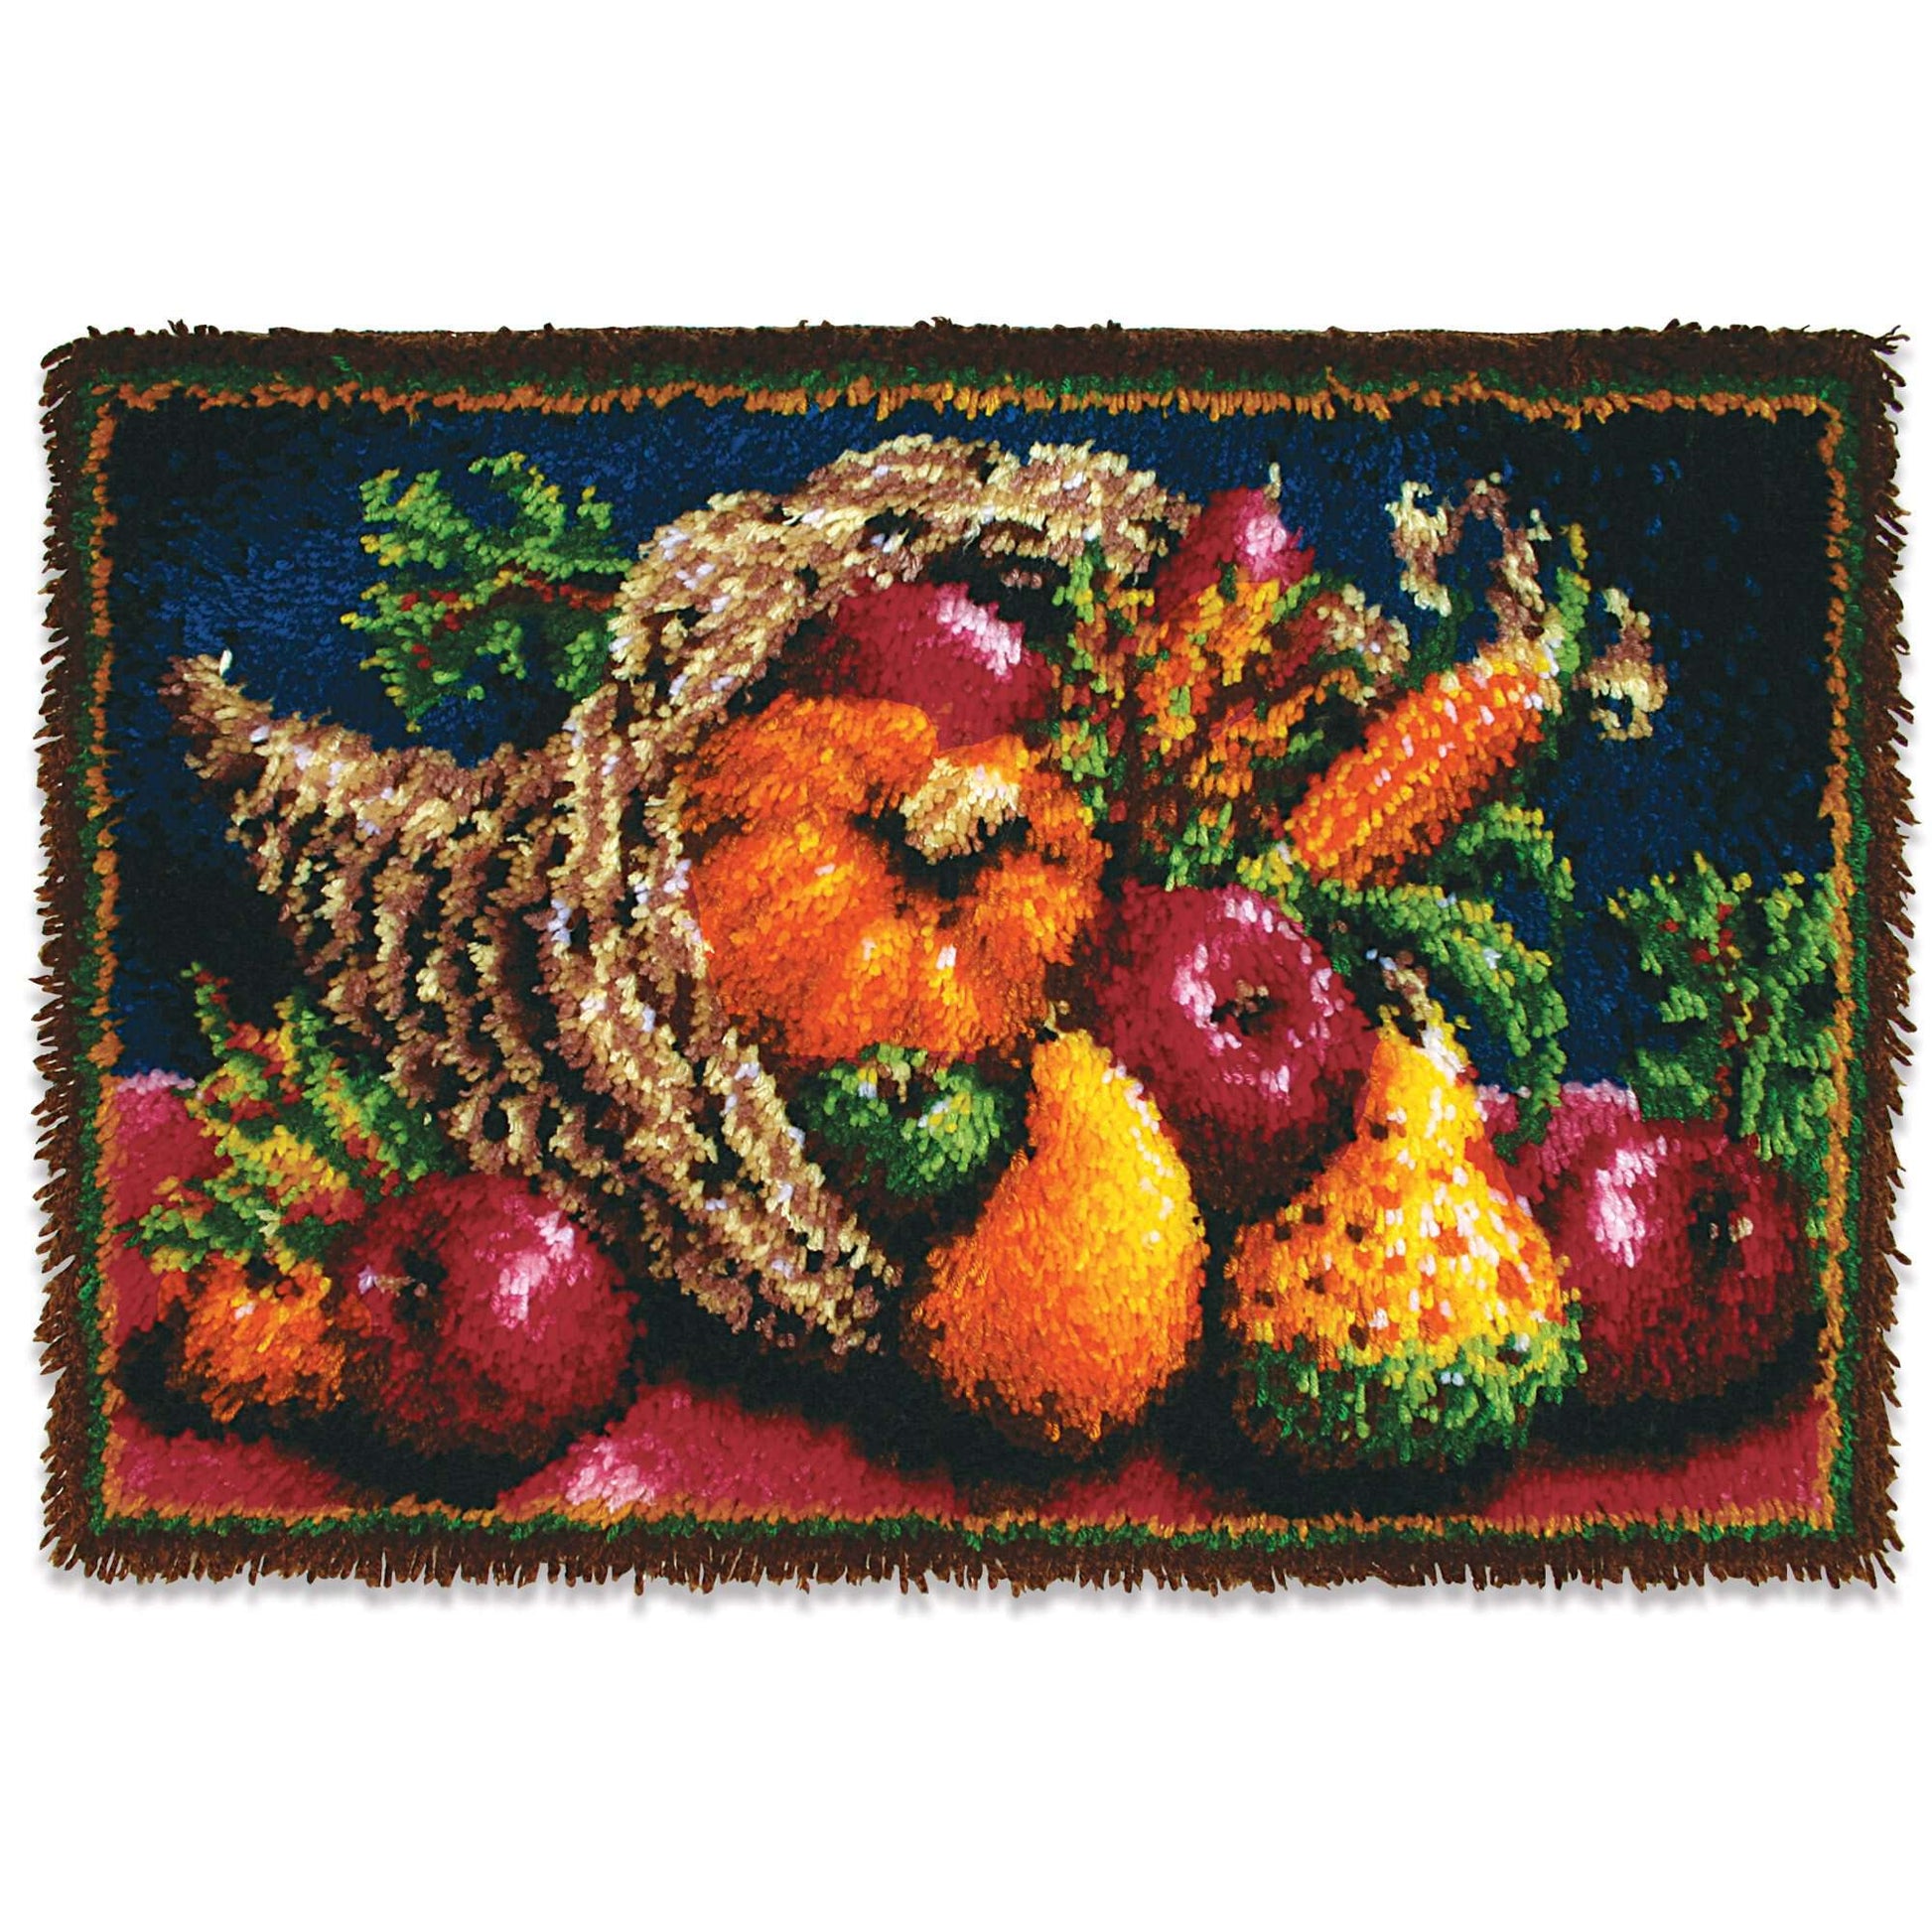 WonderArt Classic Country Harvest Kit 20" x 30", Clearance items